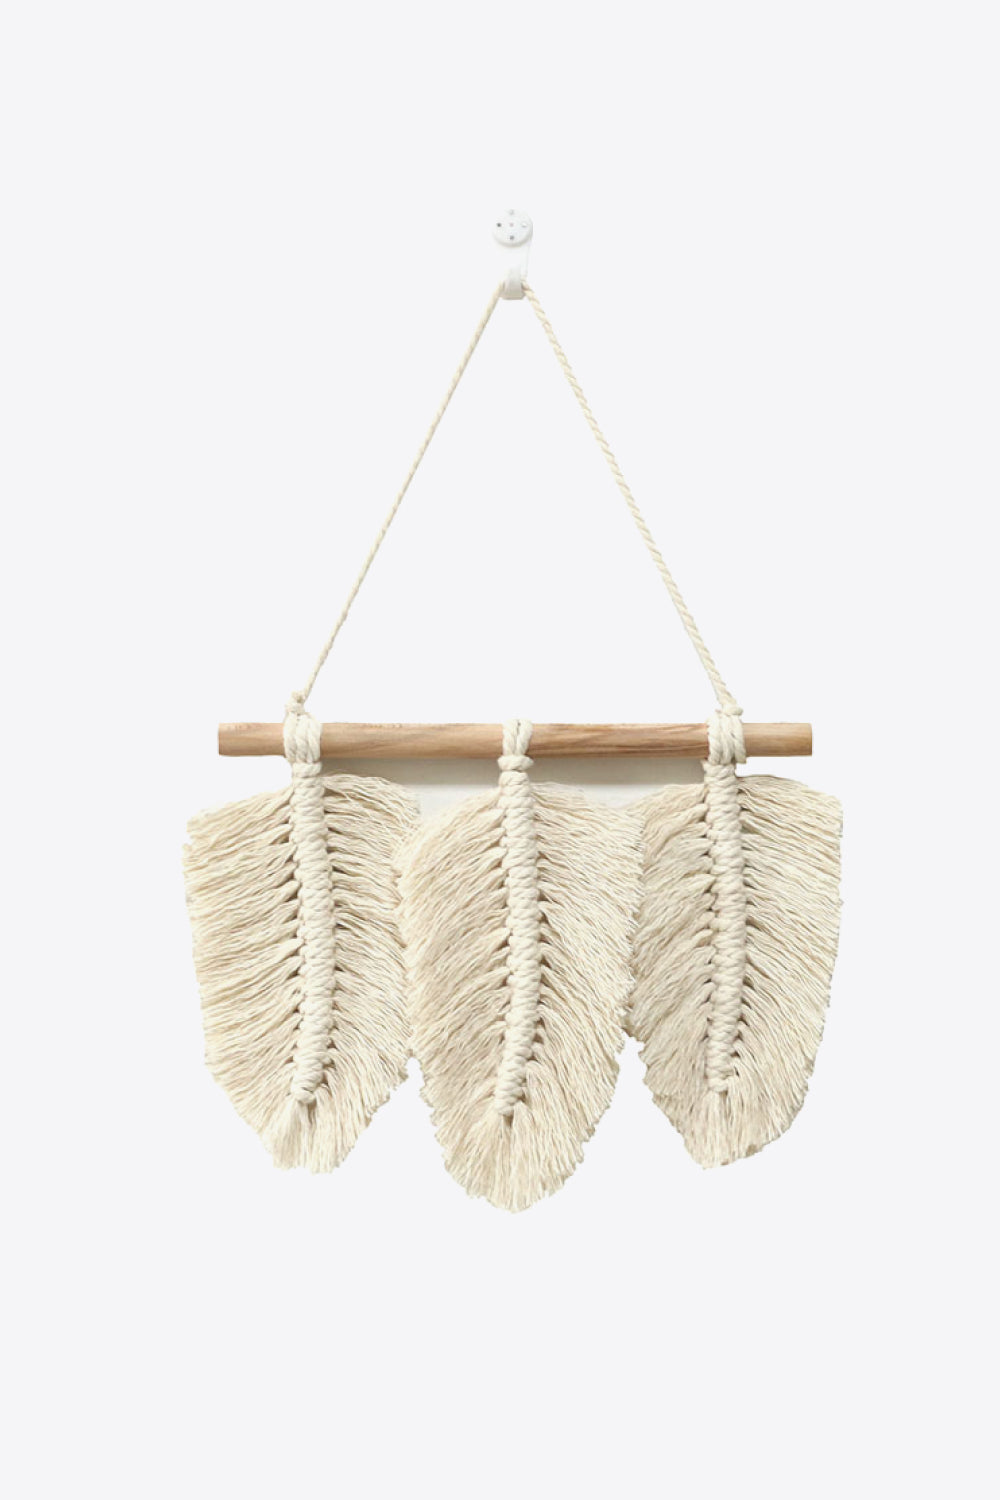 White Smoke Feather Wall Hanging Sentient Beauty Fashions Home Decor